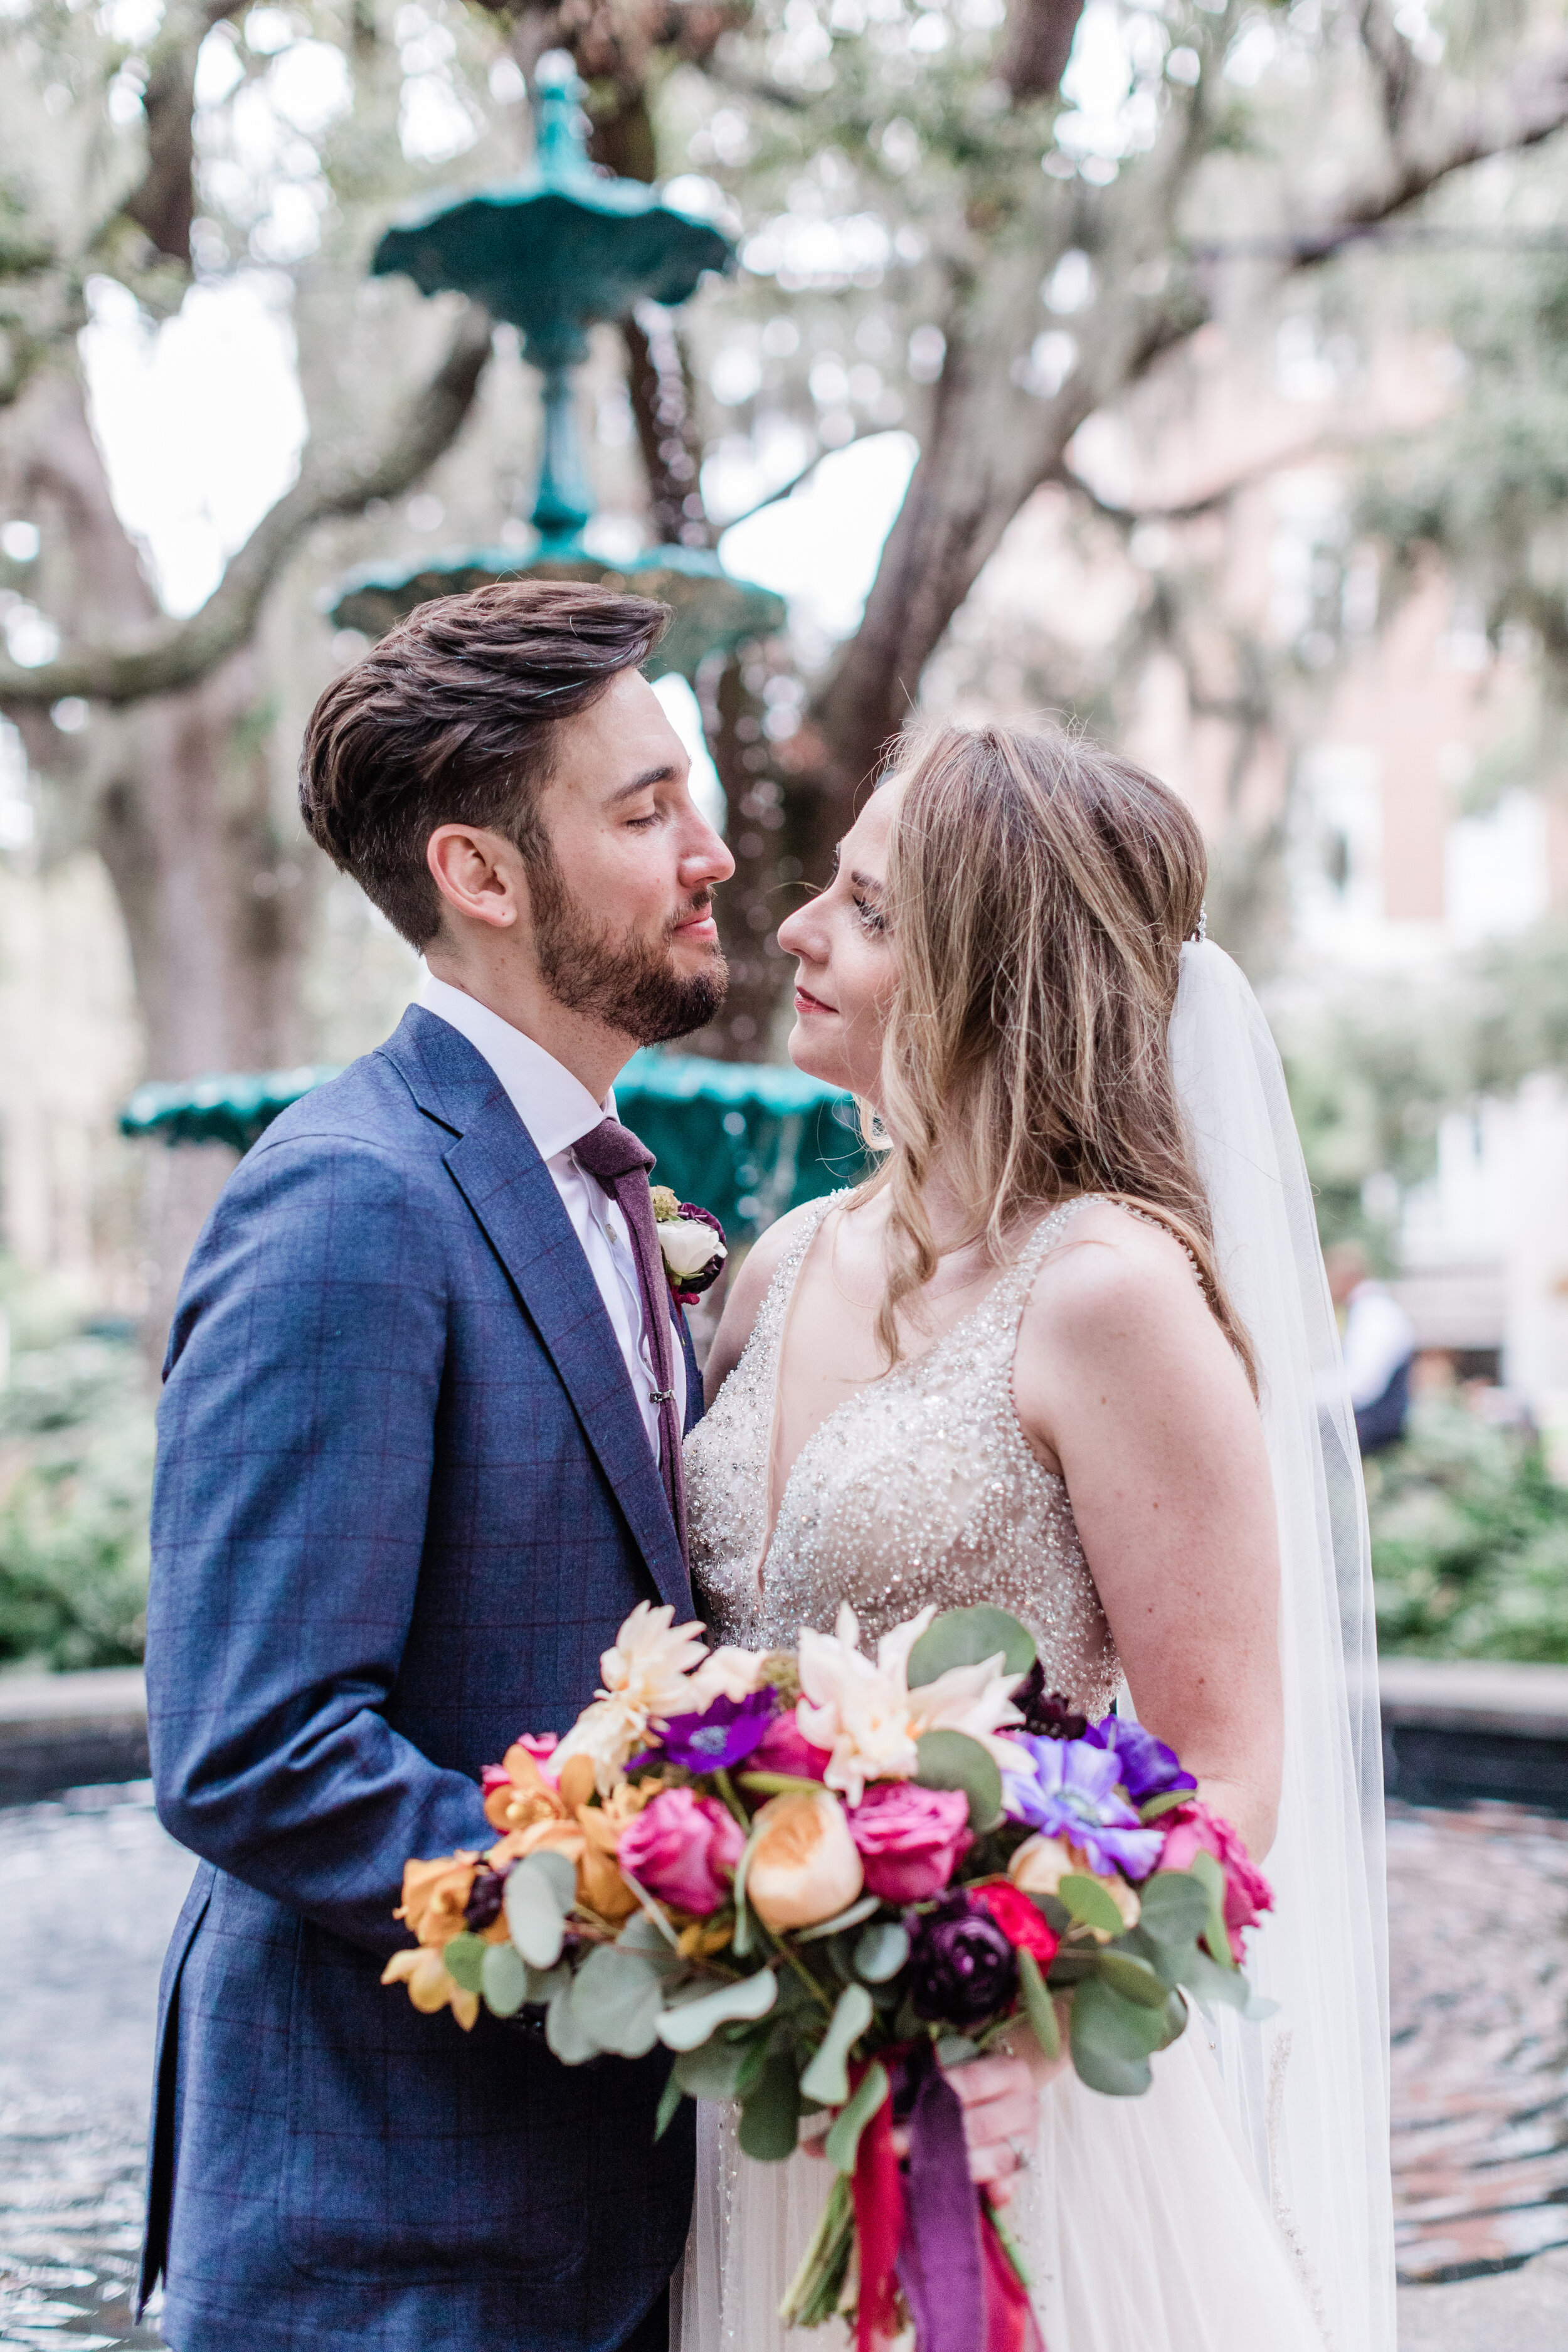 ivory-and-beau-florals-ashley-and-gerald-elopement-flowers-elope-savannah-elopement-package-flowers-florals-florist-savannah-florist-wedding-florist-bright-colorful-flowers-AptBPhoto_AshleyGerard-166.jpg